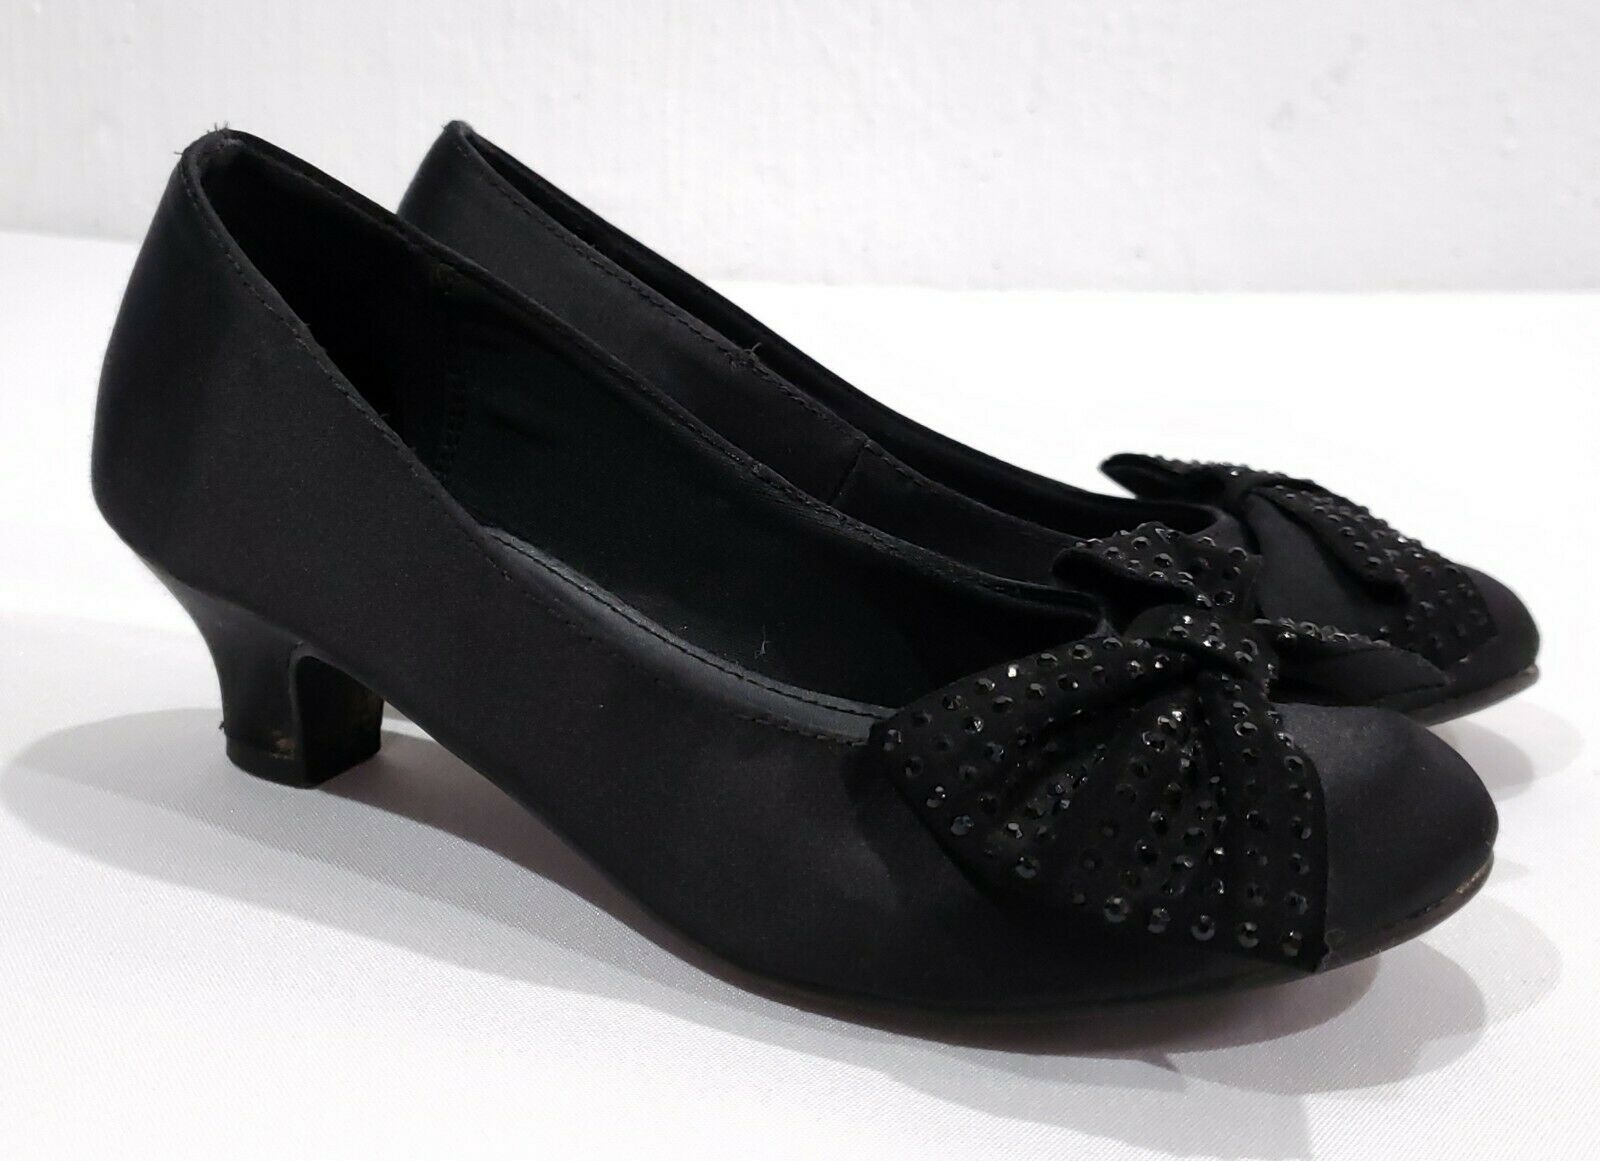 Girls Black Dress Shoes with Bow and Rhinestones Slight Heel Size 2 Candies